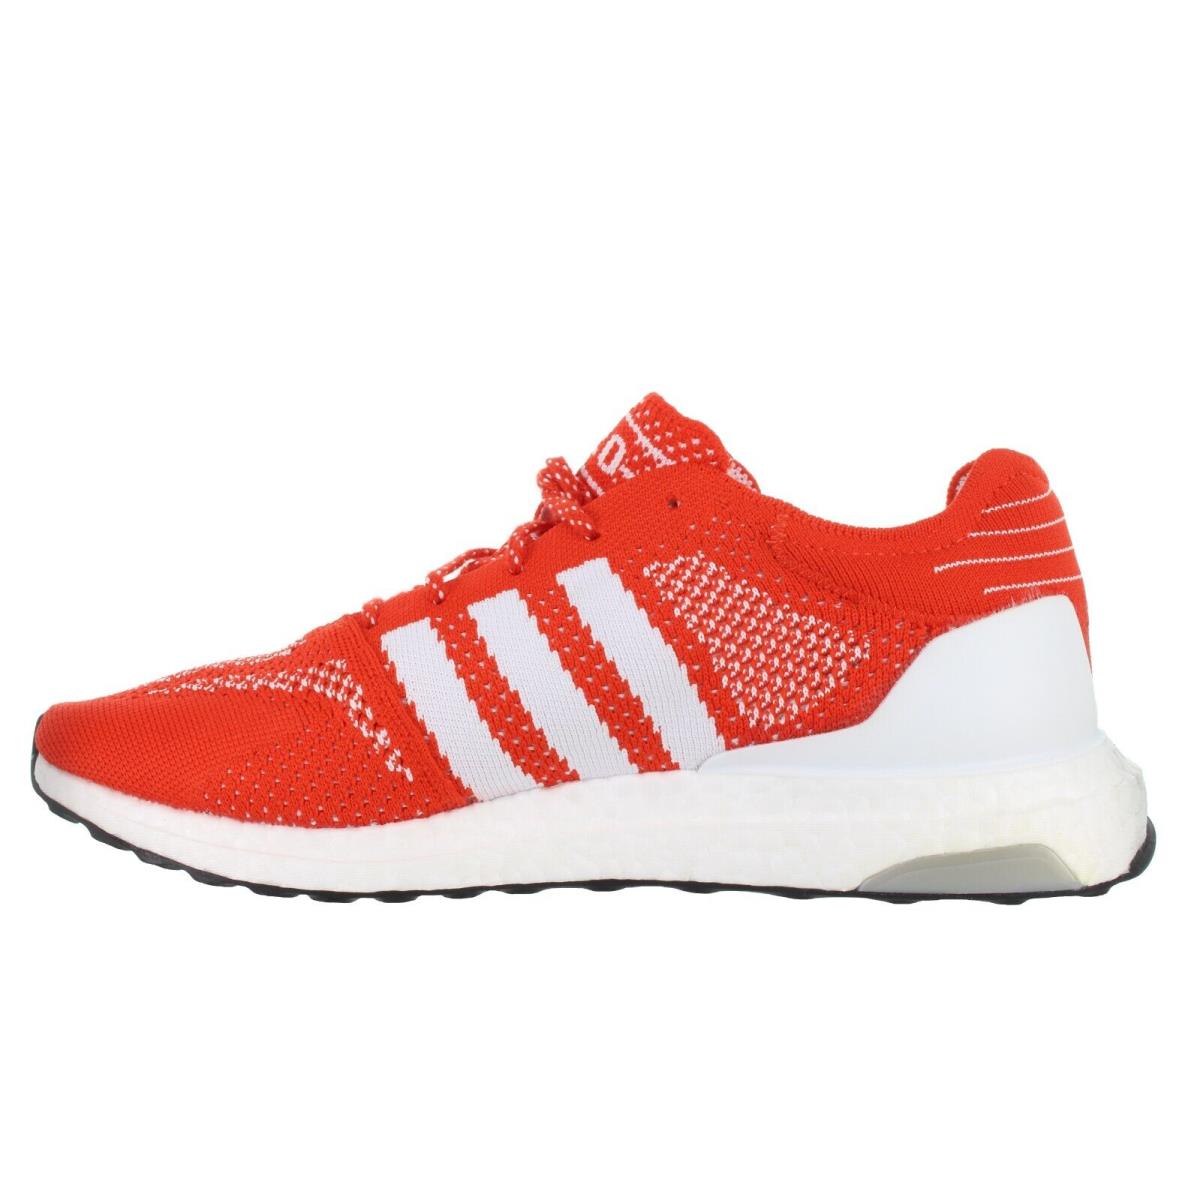 Adidas shoes Ultraboost DNA Prime - Active Red, Cloud White, Core Black 1